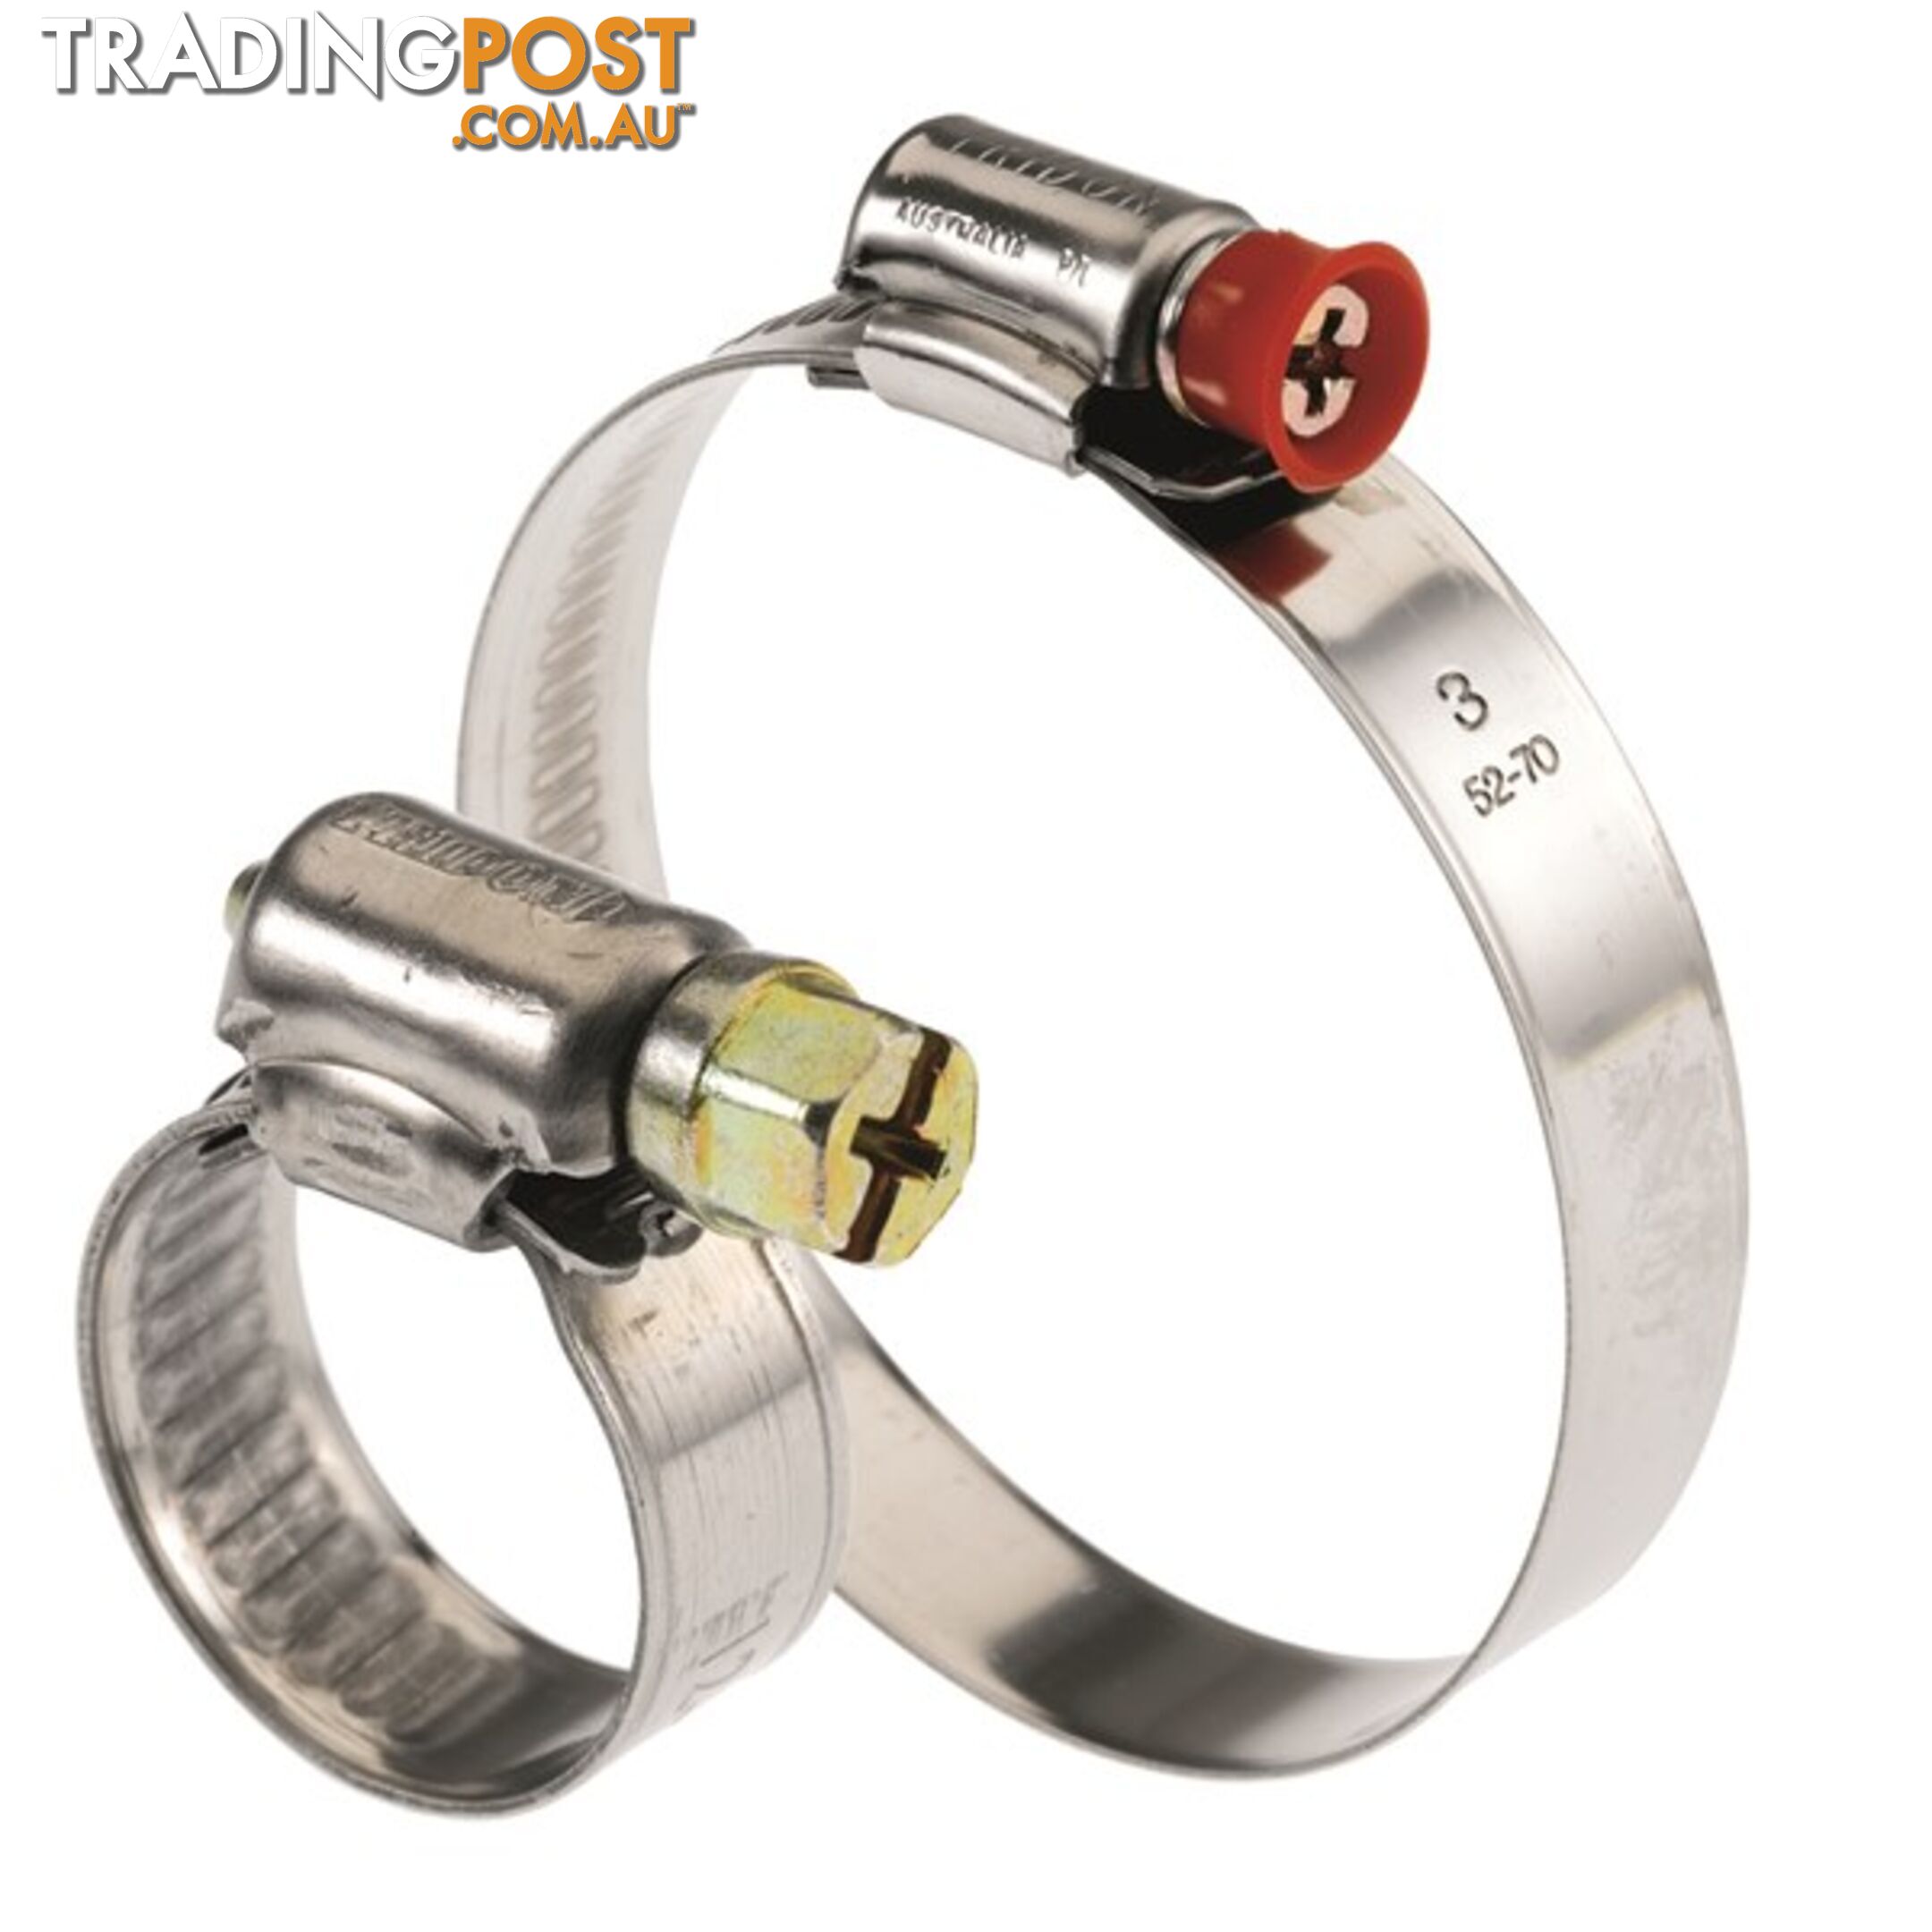 Tridon Part SS Hose Clamp 205mm-230mm Solid Band Collared 10pk SKU - MPC10